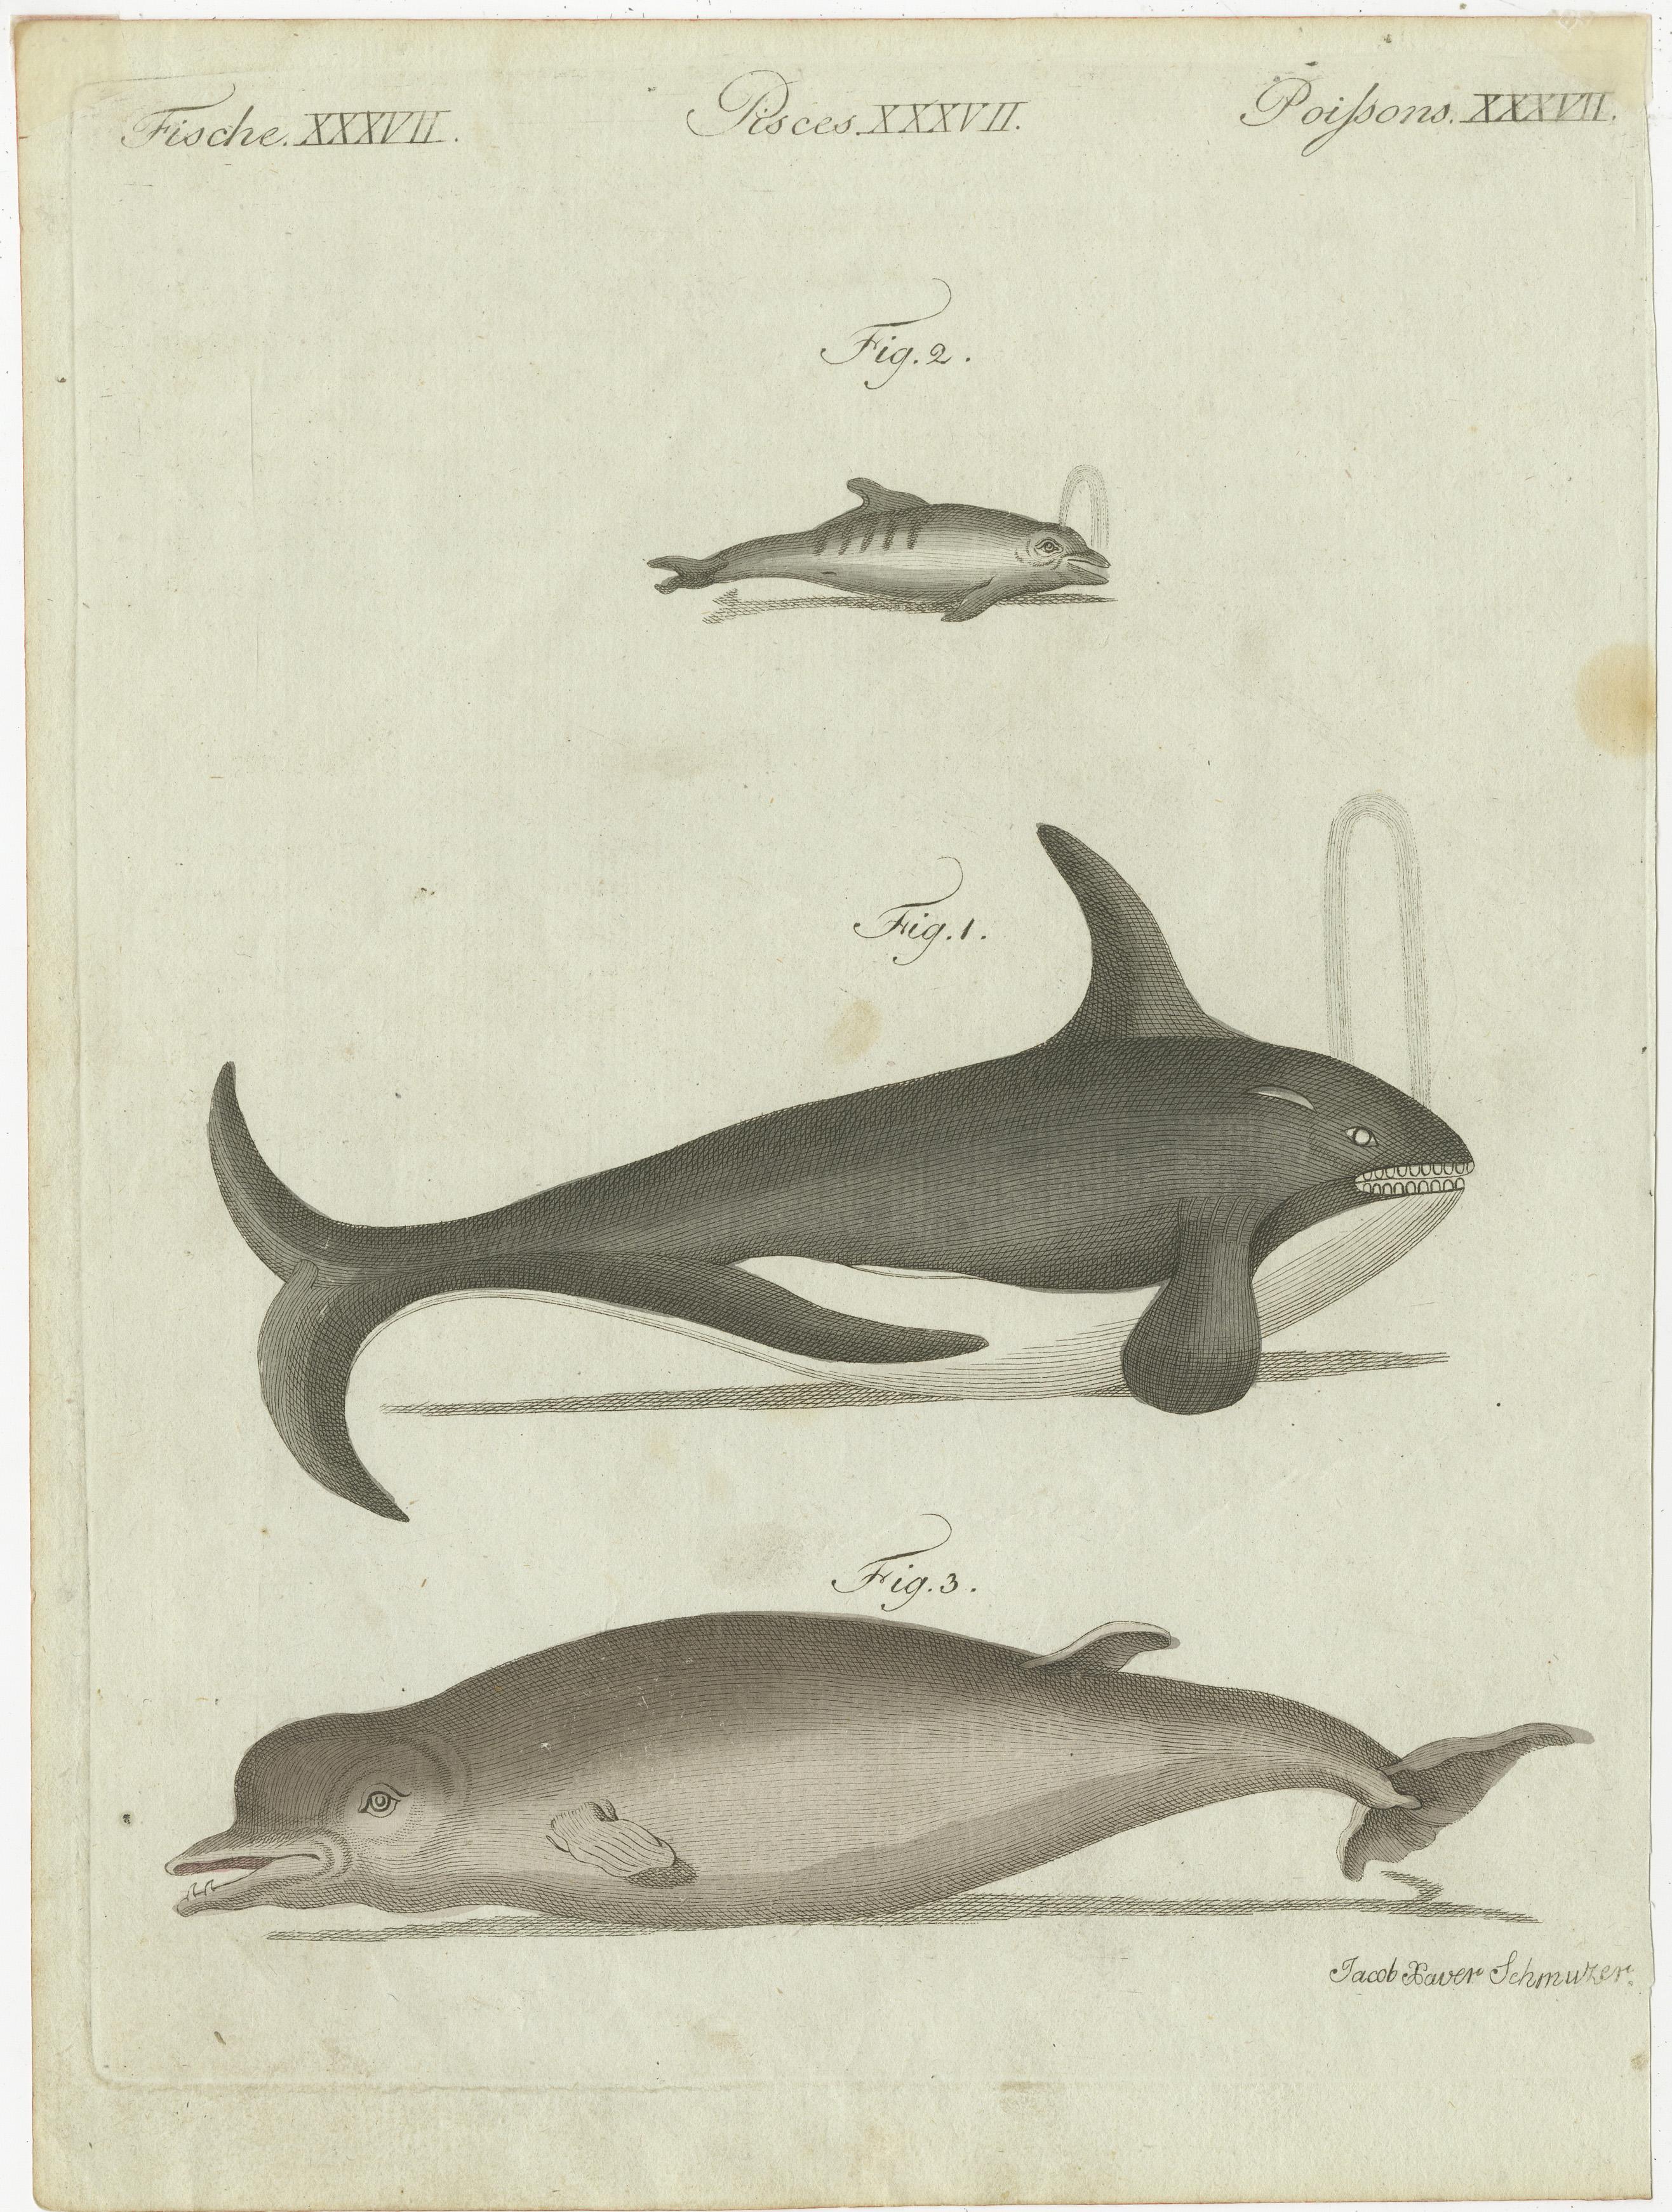 Old print of a fin whale or rorqual, Balaenoptera physalus, endangered 1, bottlenose dolphin, Tursiops truncatus 2, and northern bottle-nosed whale, Hyperoodon ampullatus 3. Most likely originating from an edition of Friedrich Johann Bertuch's